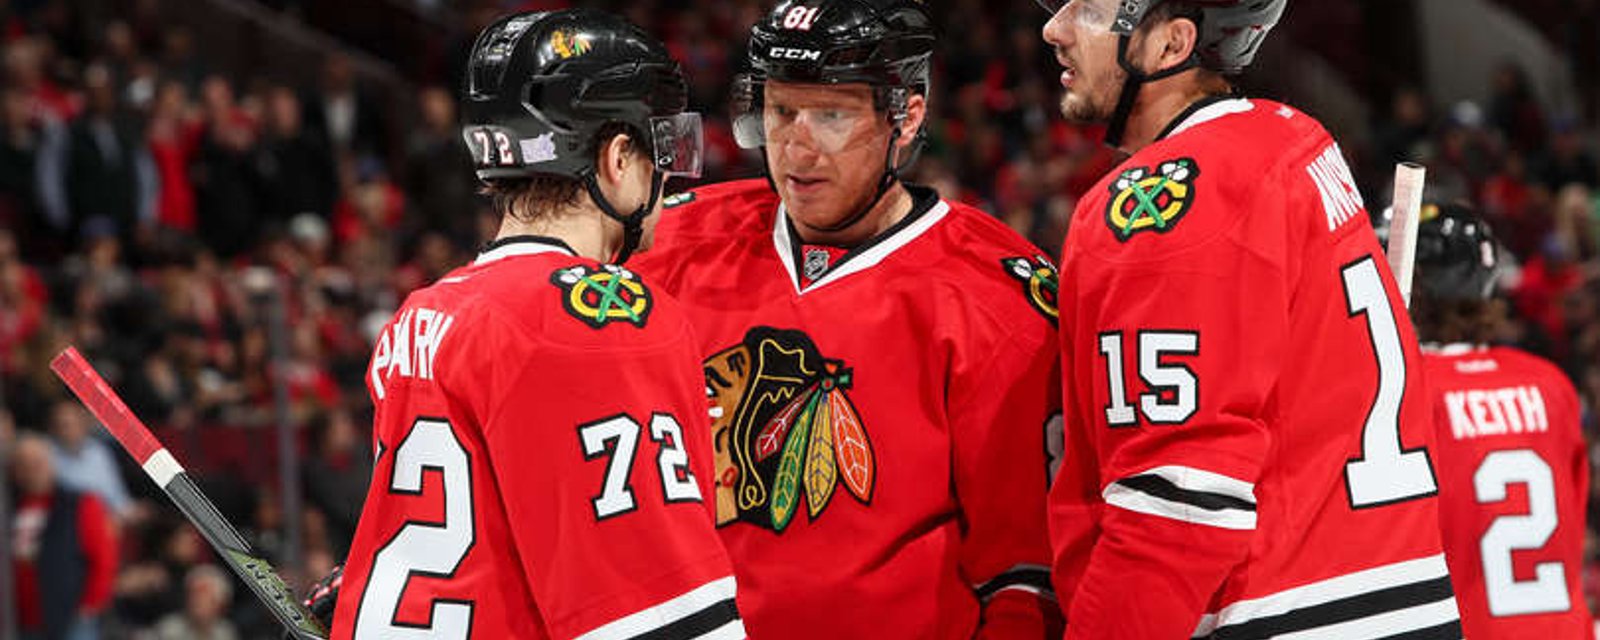 Blackhawks Player Fighting For First Place